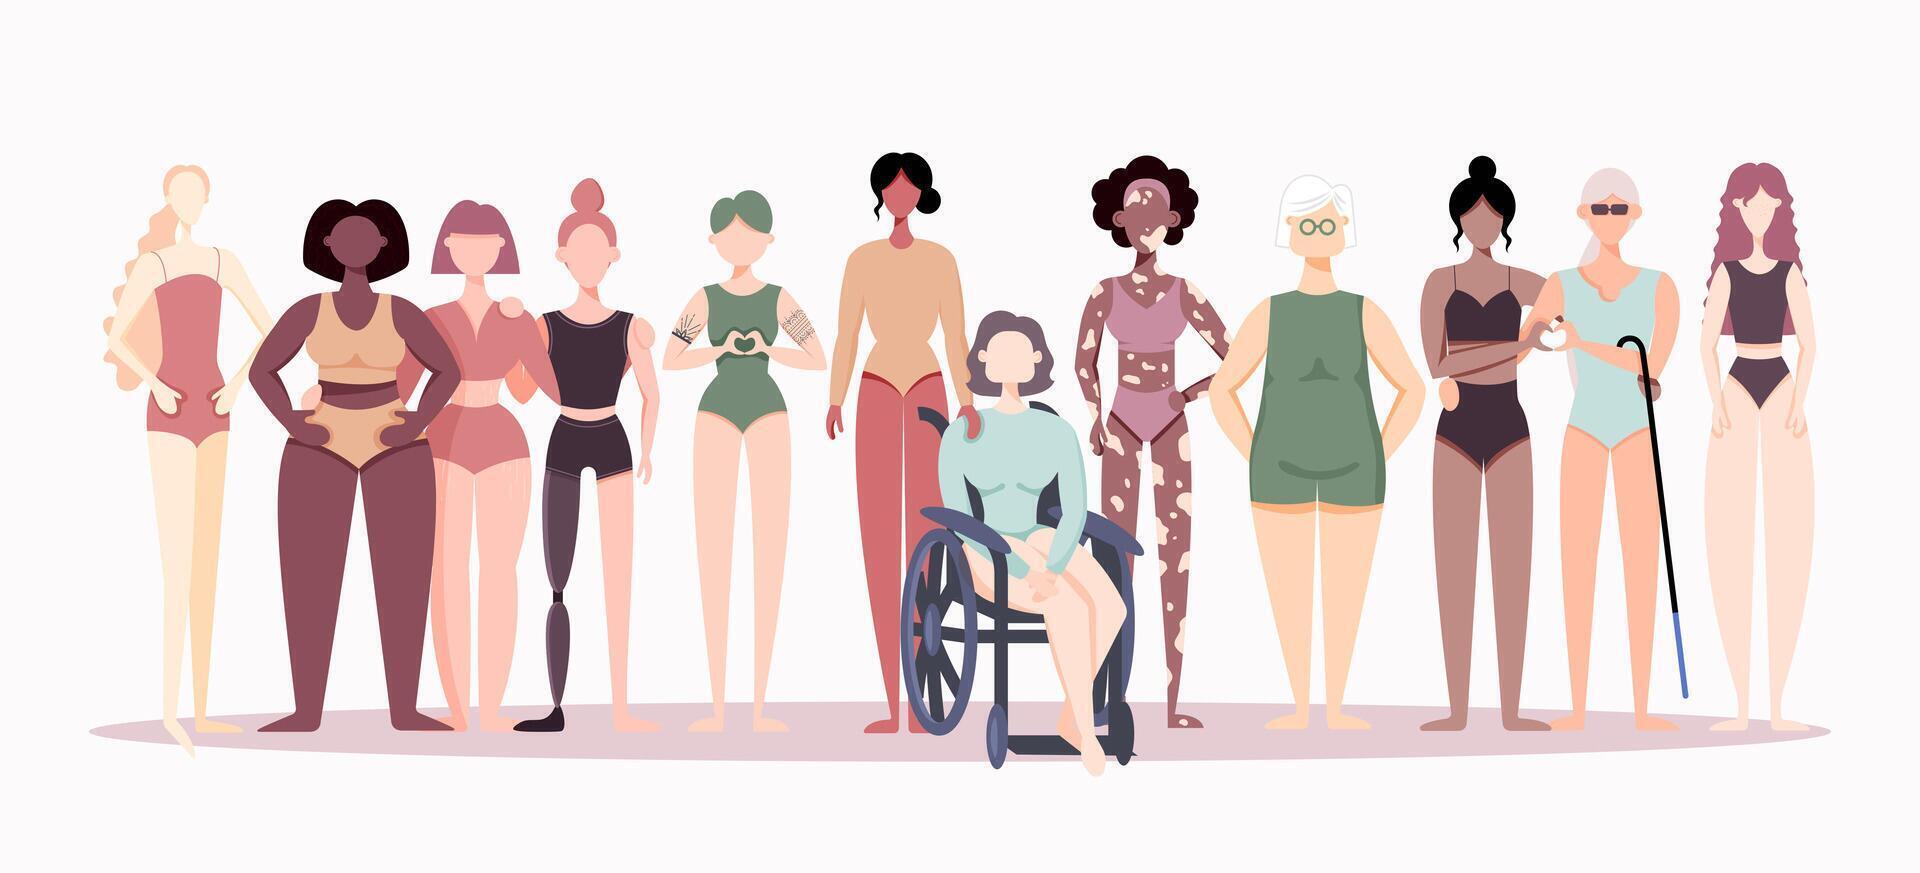 Group of women in different ethnicity, abilities, age, body type, hair color. Vector illustration of diverse women in pastel color underwear. Hand drawn characters in flat style. Body inclusion.